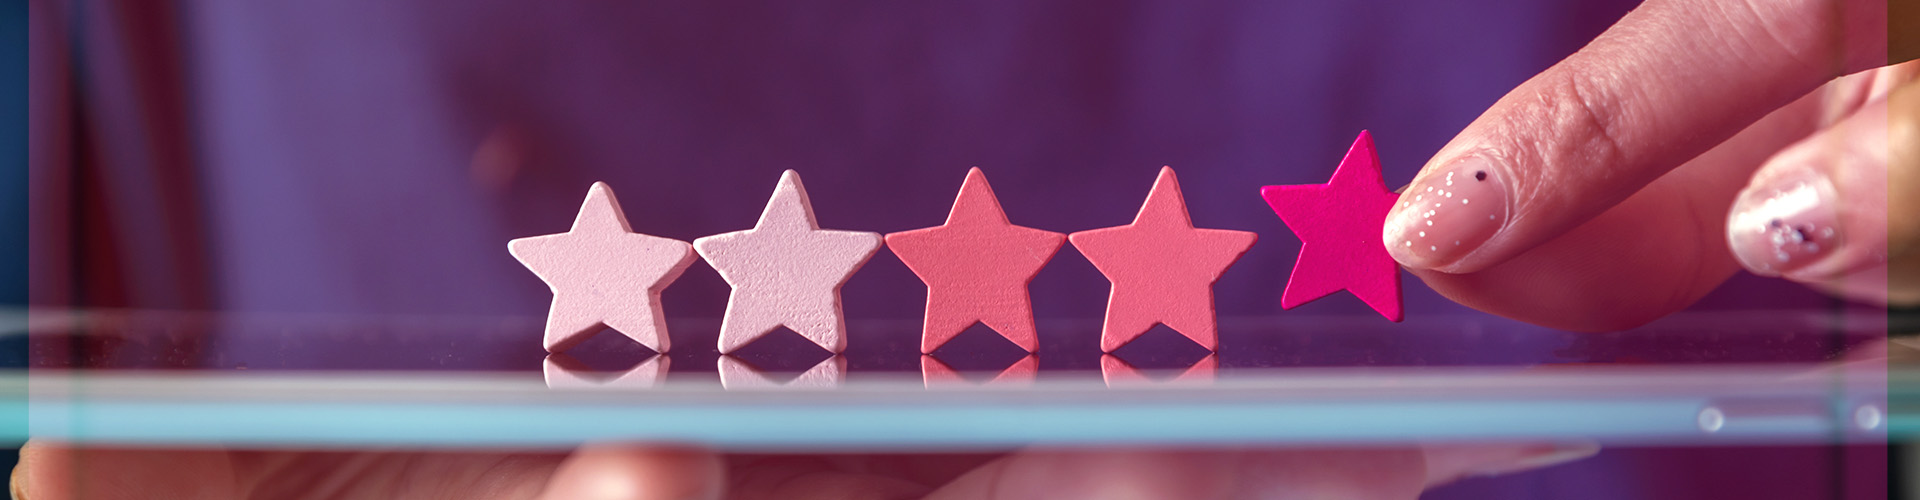 Hand placing stars down to represent categories banner